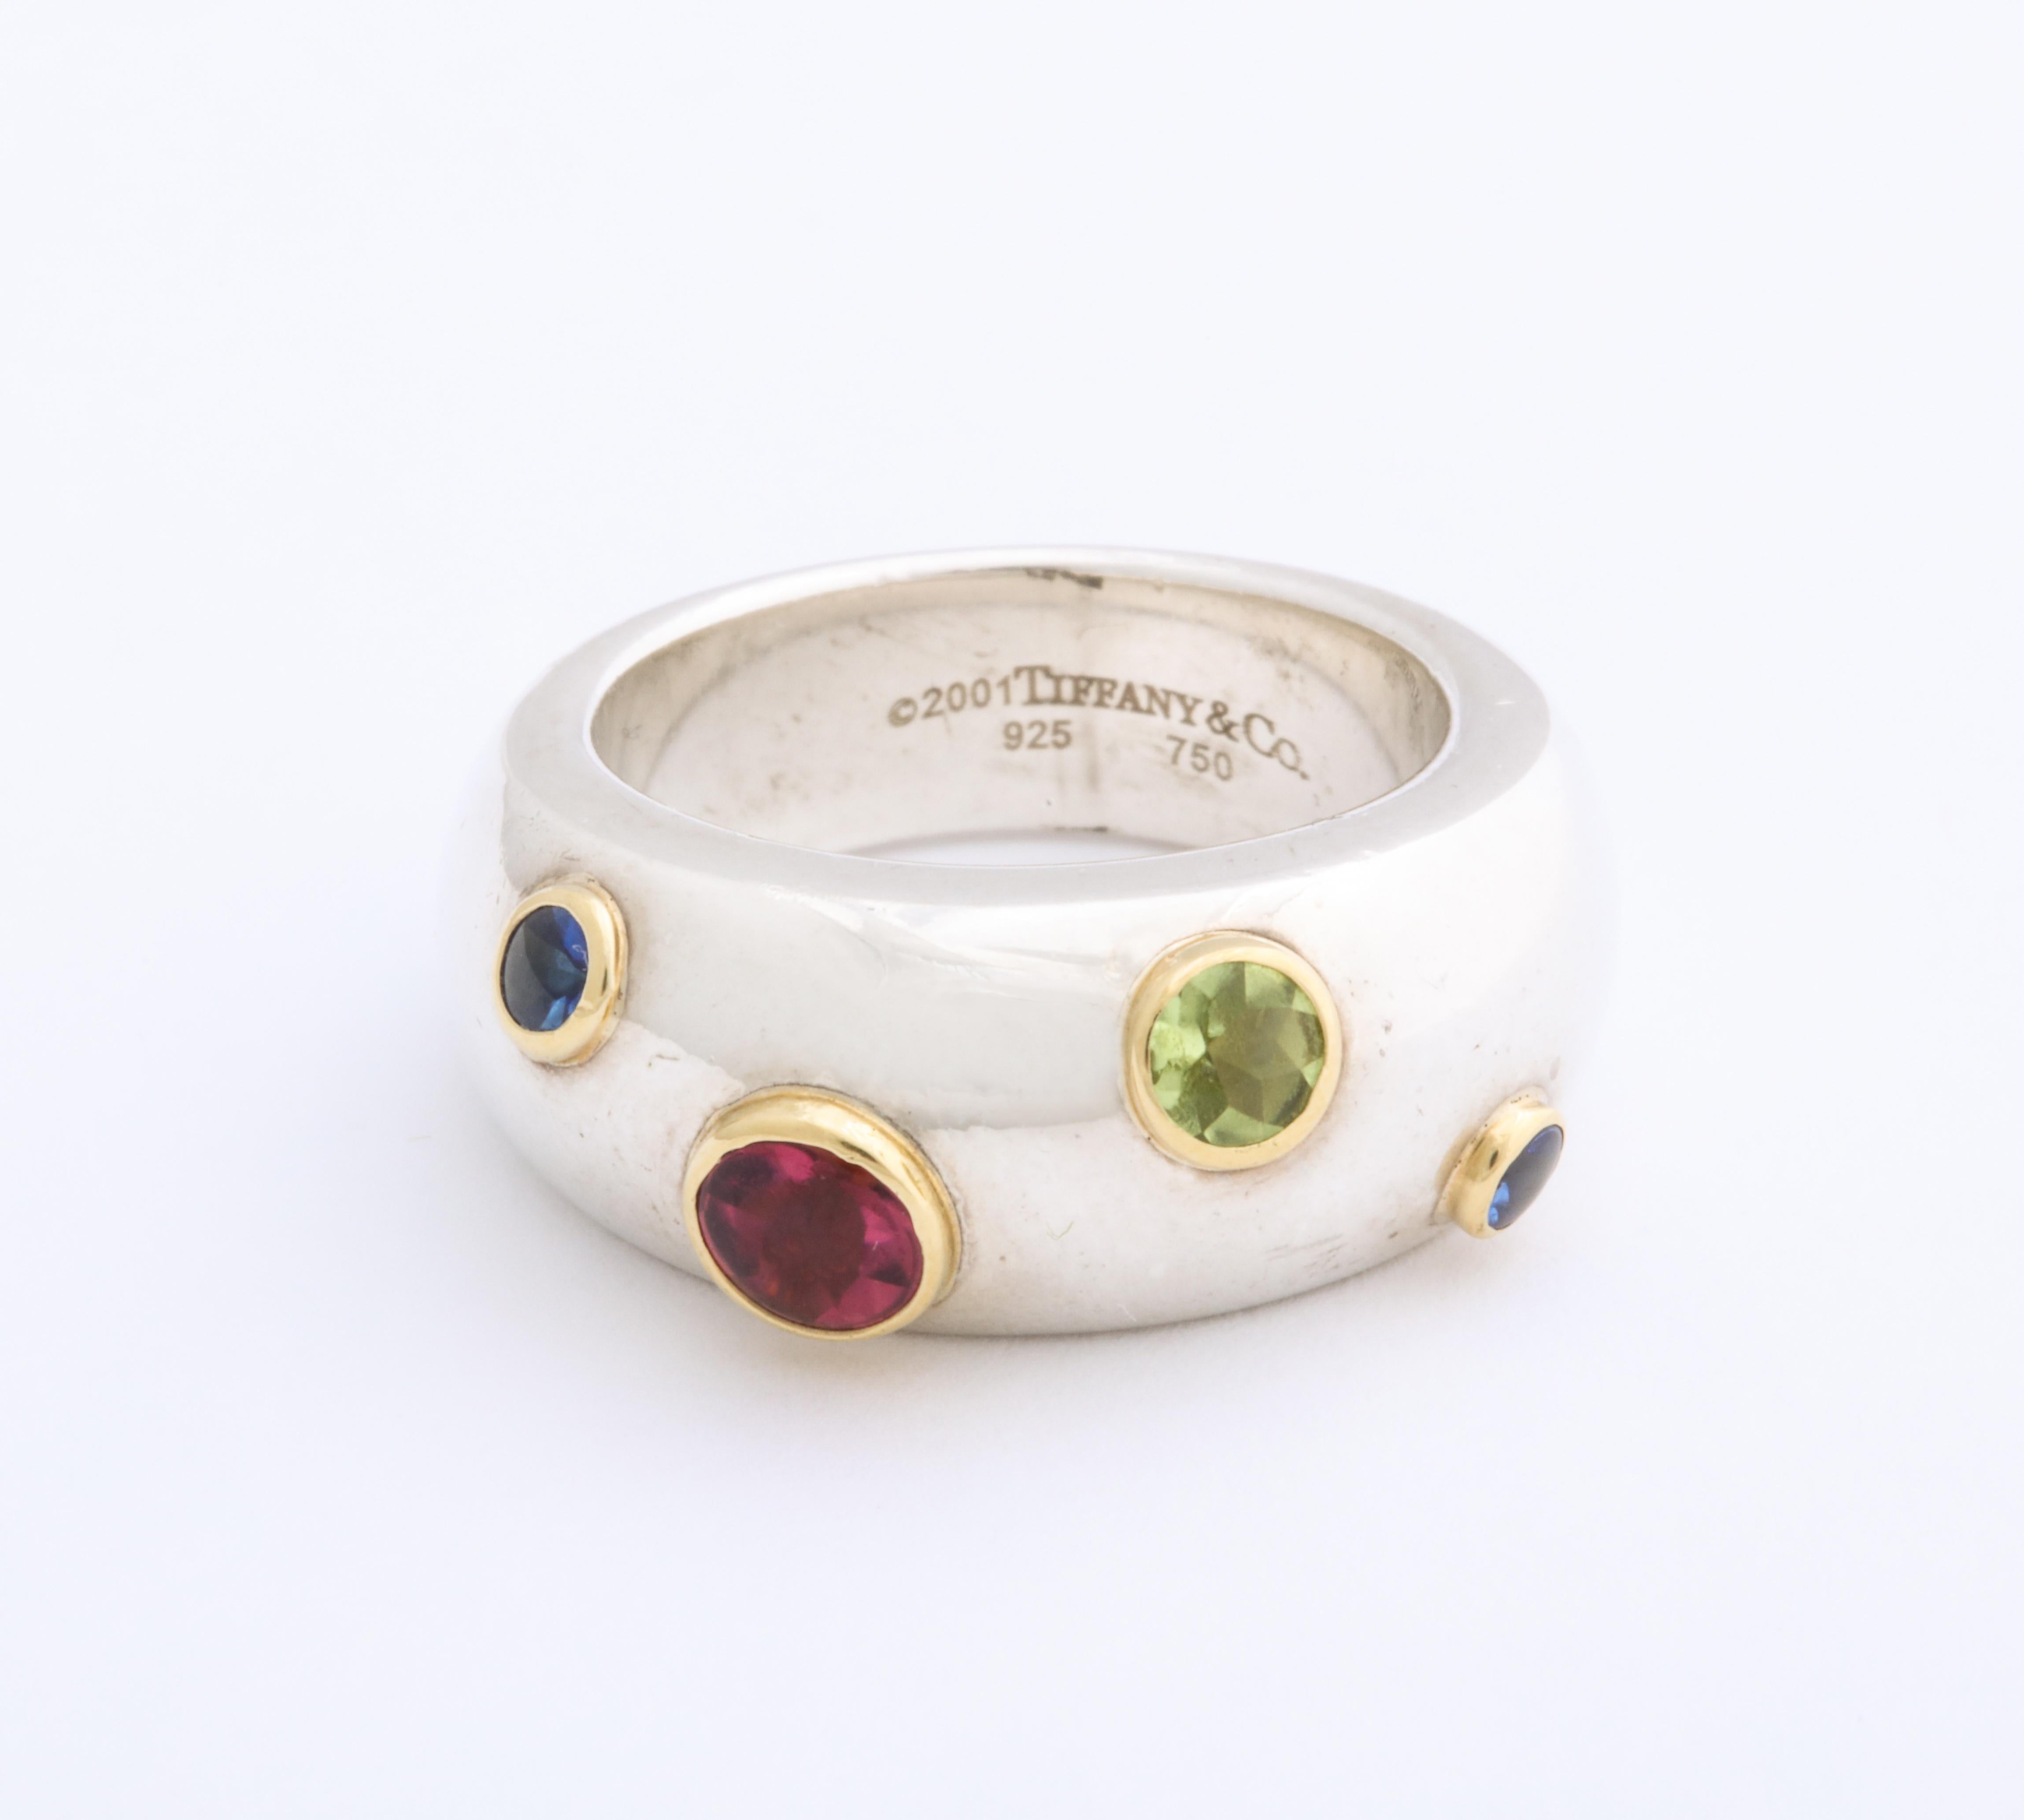 No longer in production, a significant Tiffany wedding or fashion ring sprinkles gold set sapphires, peridot and pink tourmaline in a serpentine river around your finger. The gems are standout with beautiful Tiffany quality with yellow gold bezels